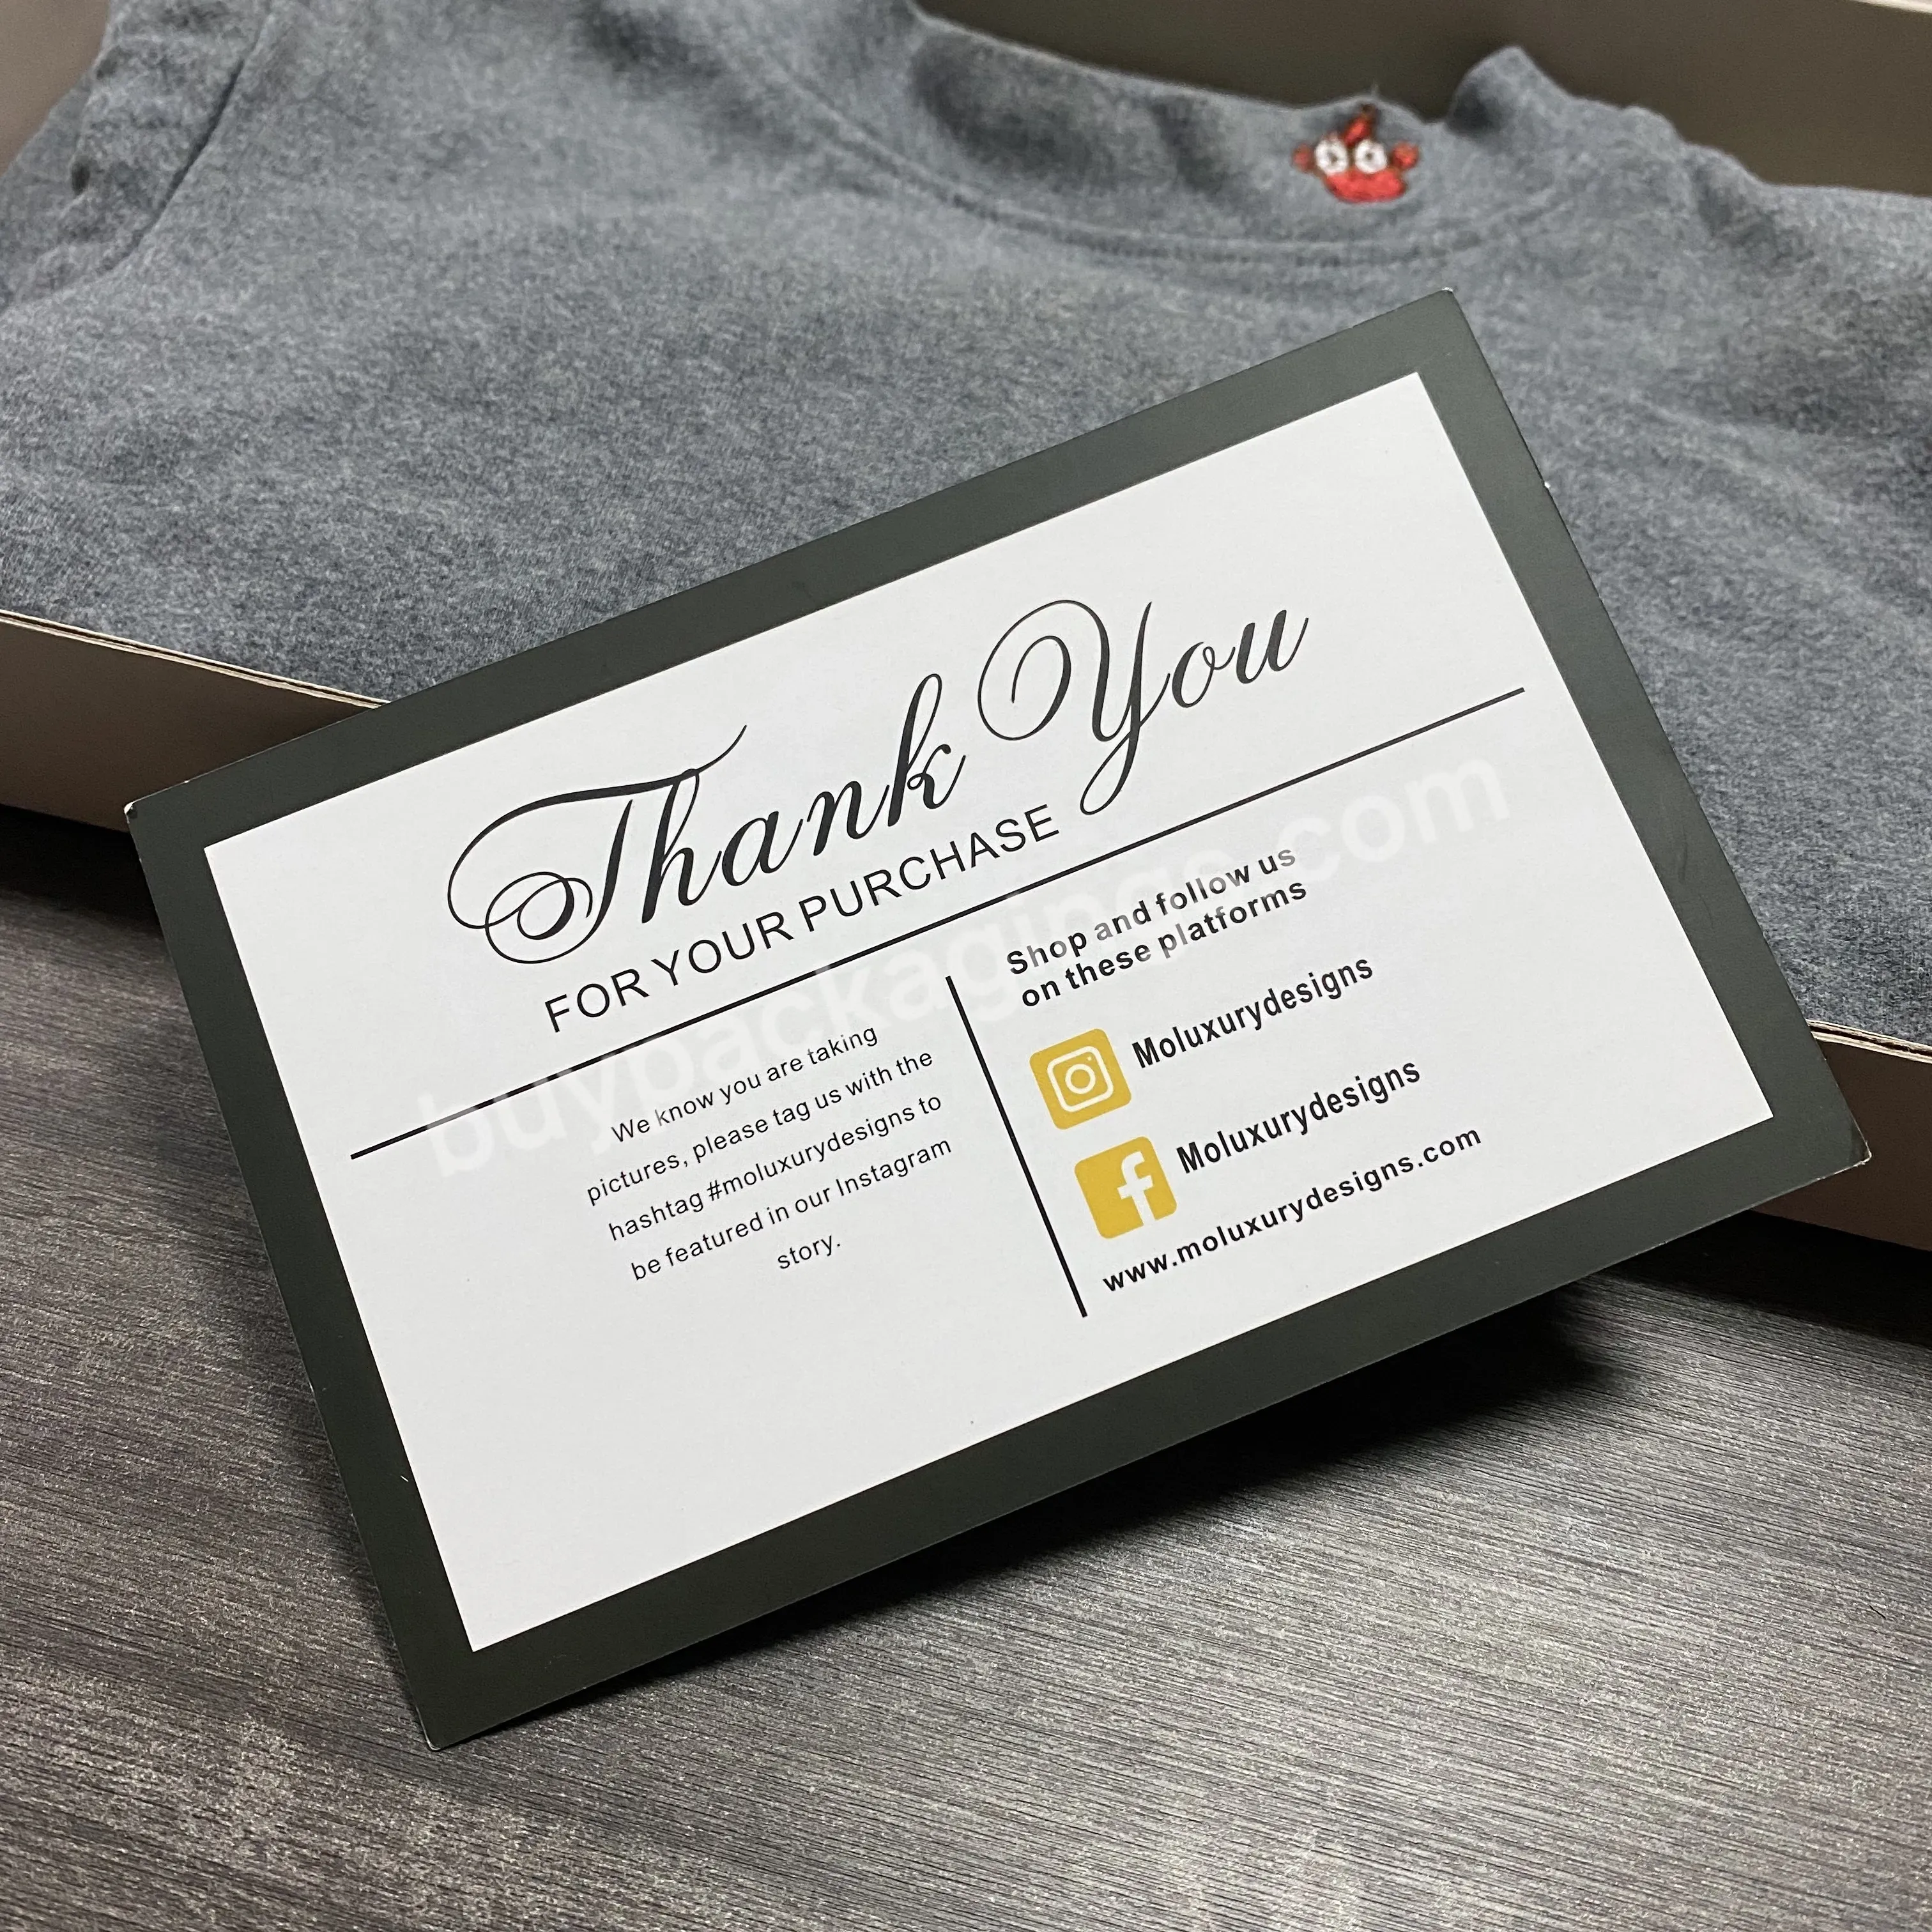 Custom Printing Thank You Cards Thanks For Your Purchase Discount Code Business Card Paper Hang Tag Name Logo Wed - Buy Business Card With Own Logo,Amazon Thank You Card,Paper Insert.